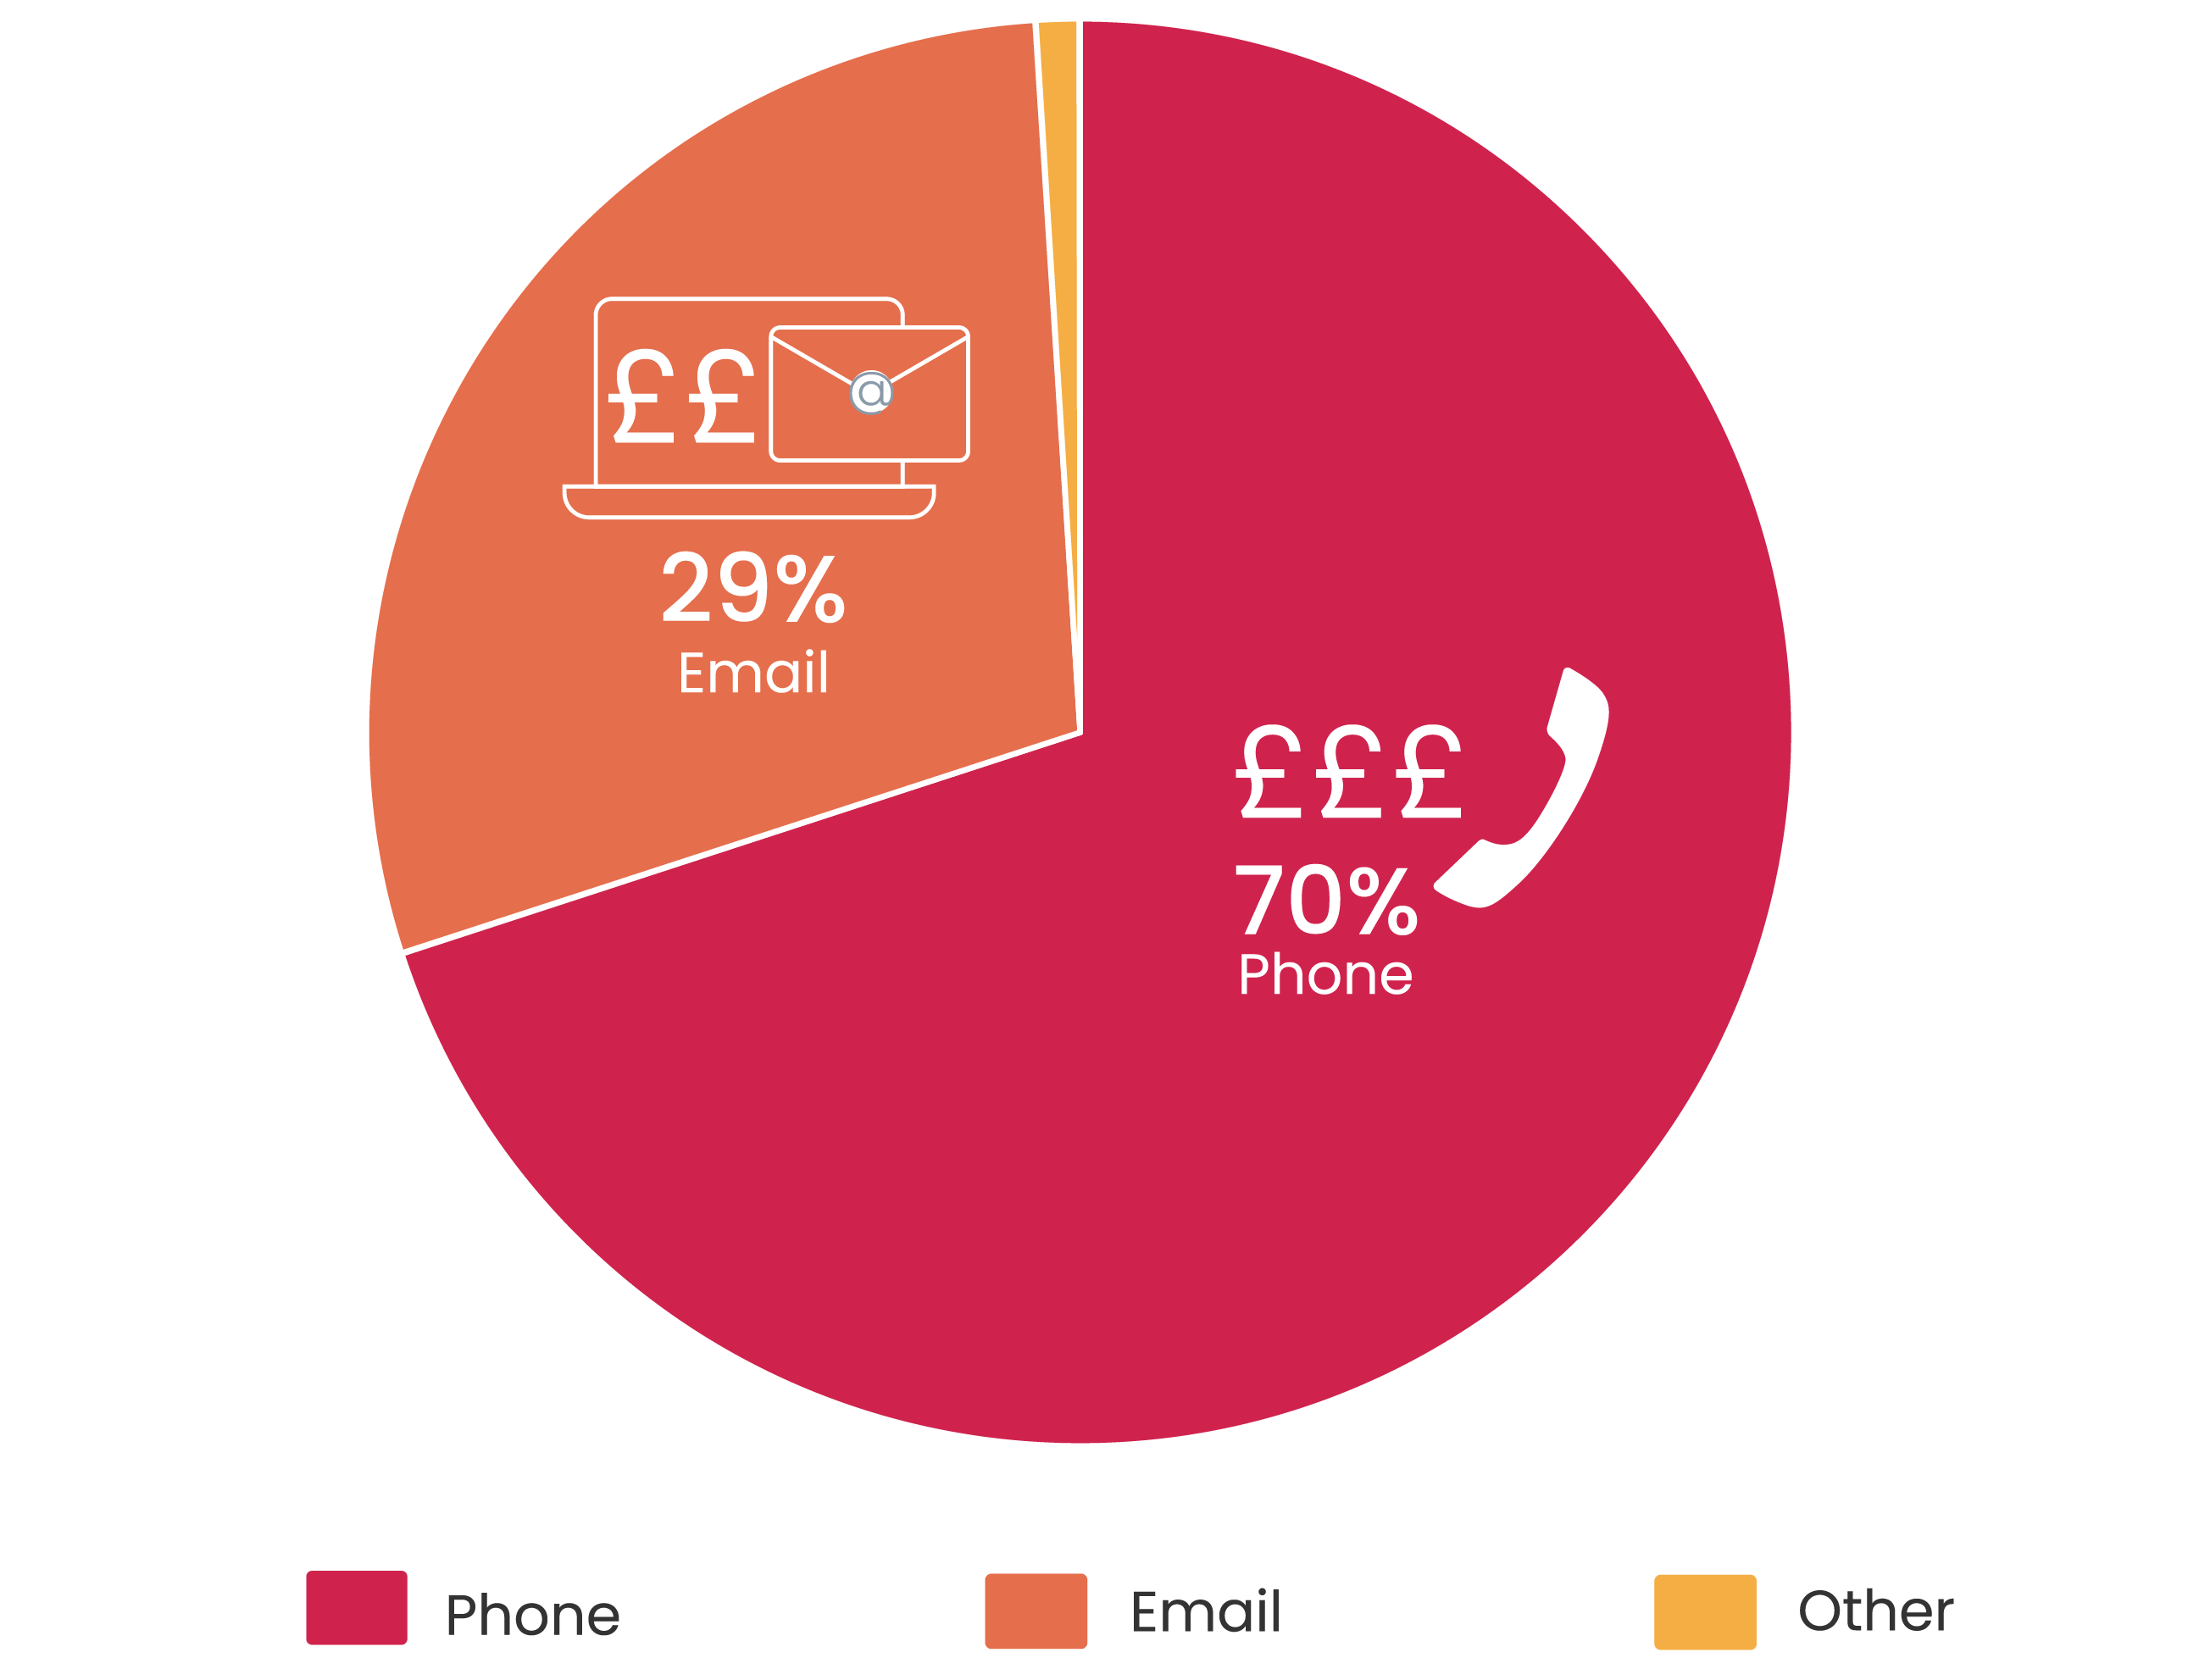 A pie chart showing how expensive different call methods are, with phone being the most expensive and then emails